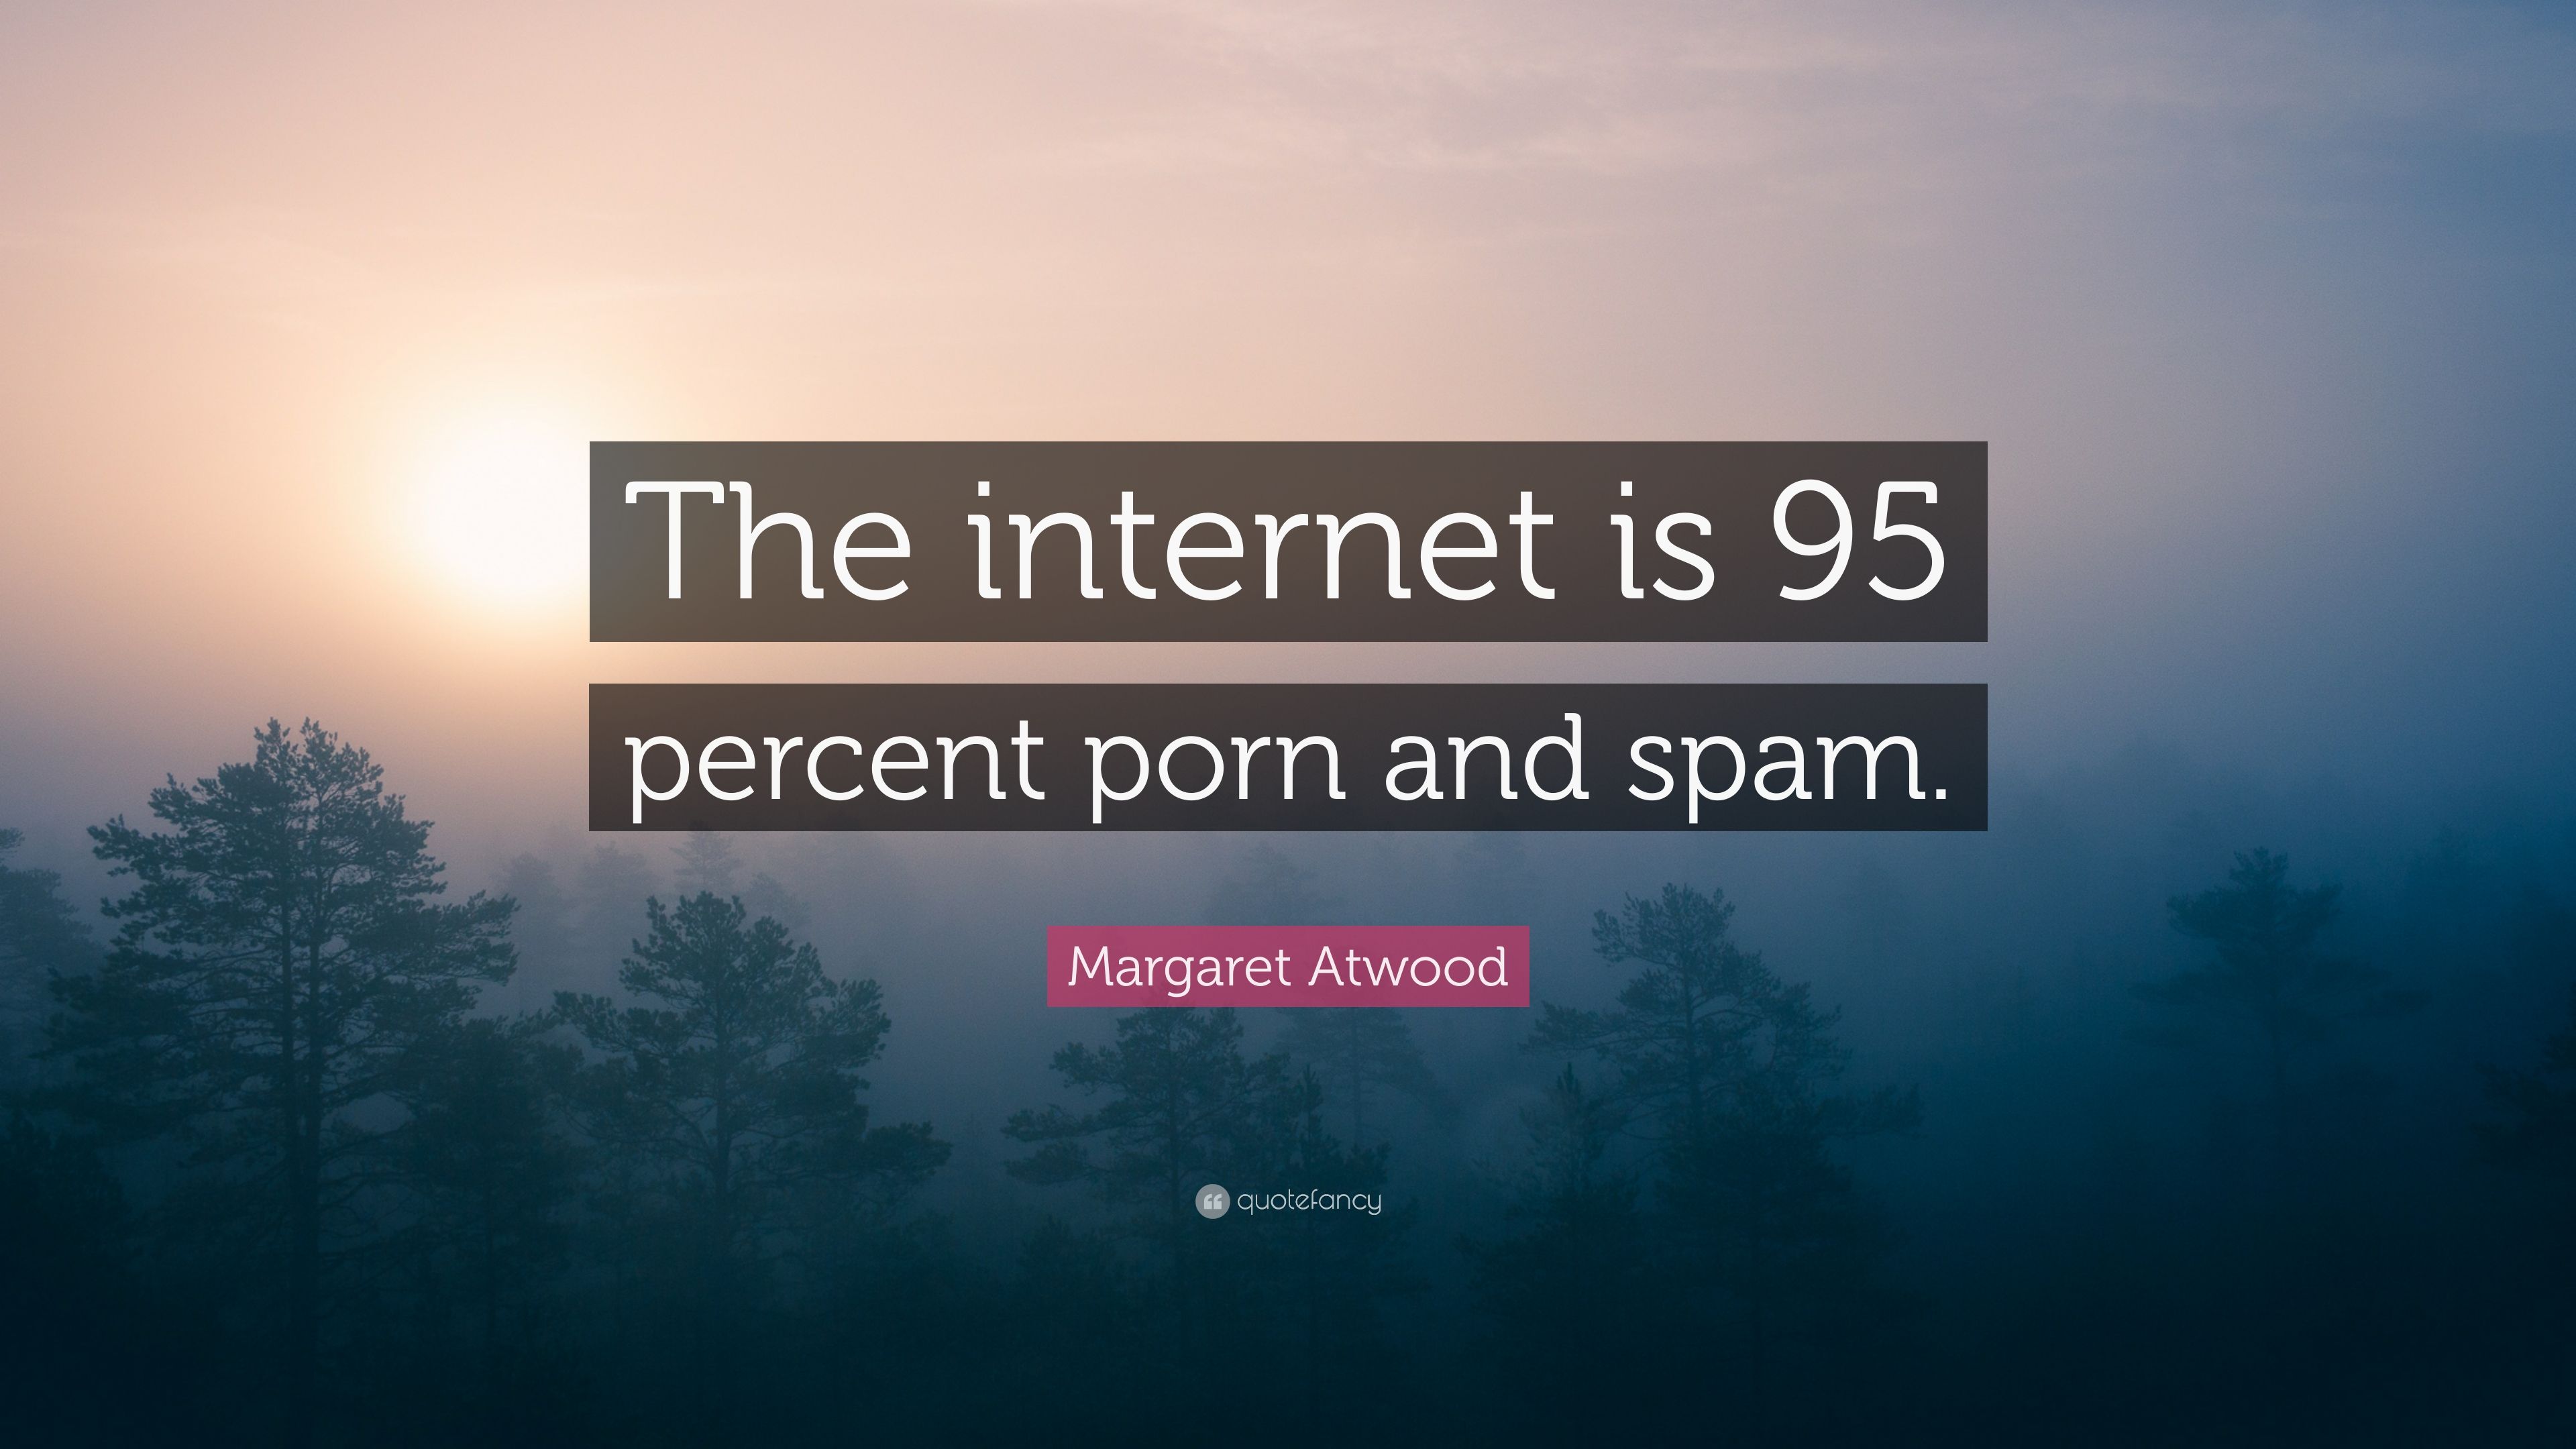 Margaret Atwood Quote: “The internet is 95 percent porn and spam.” (7 wallpaper)